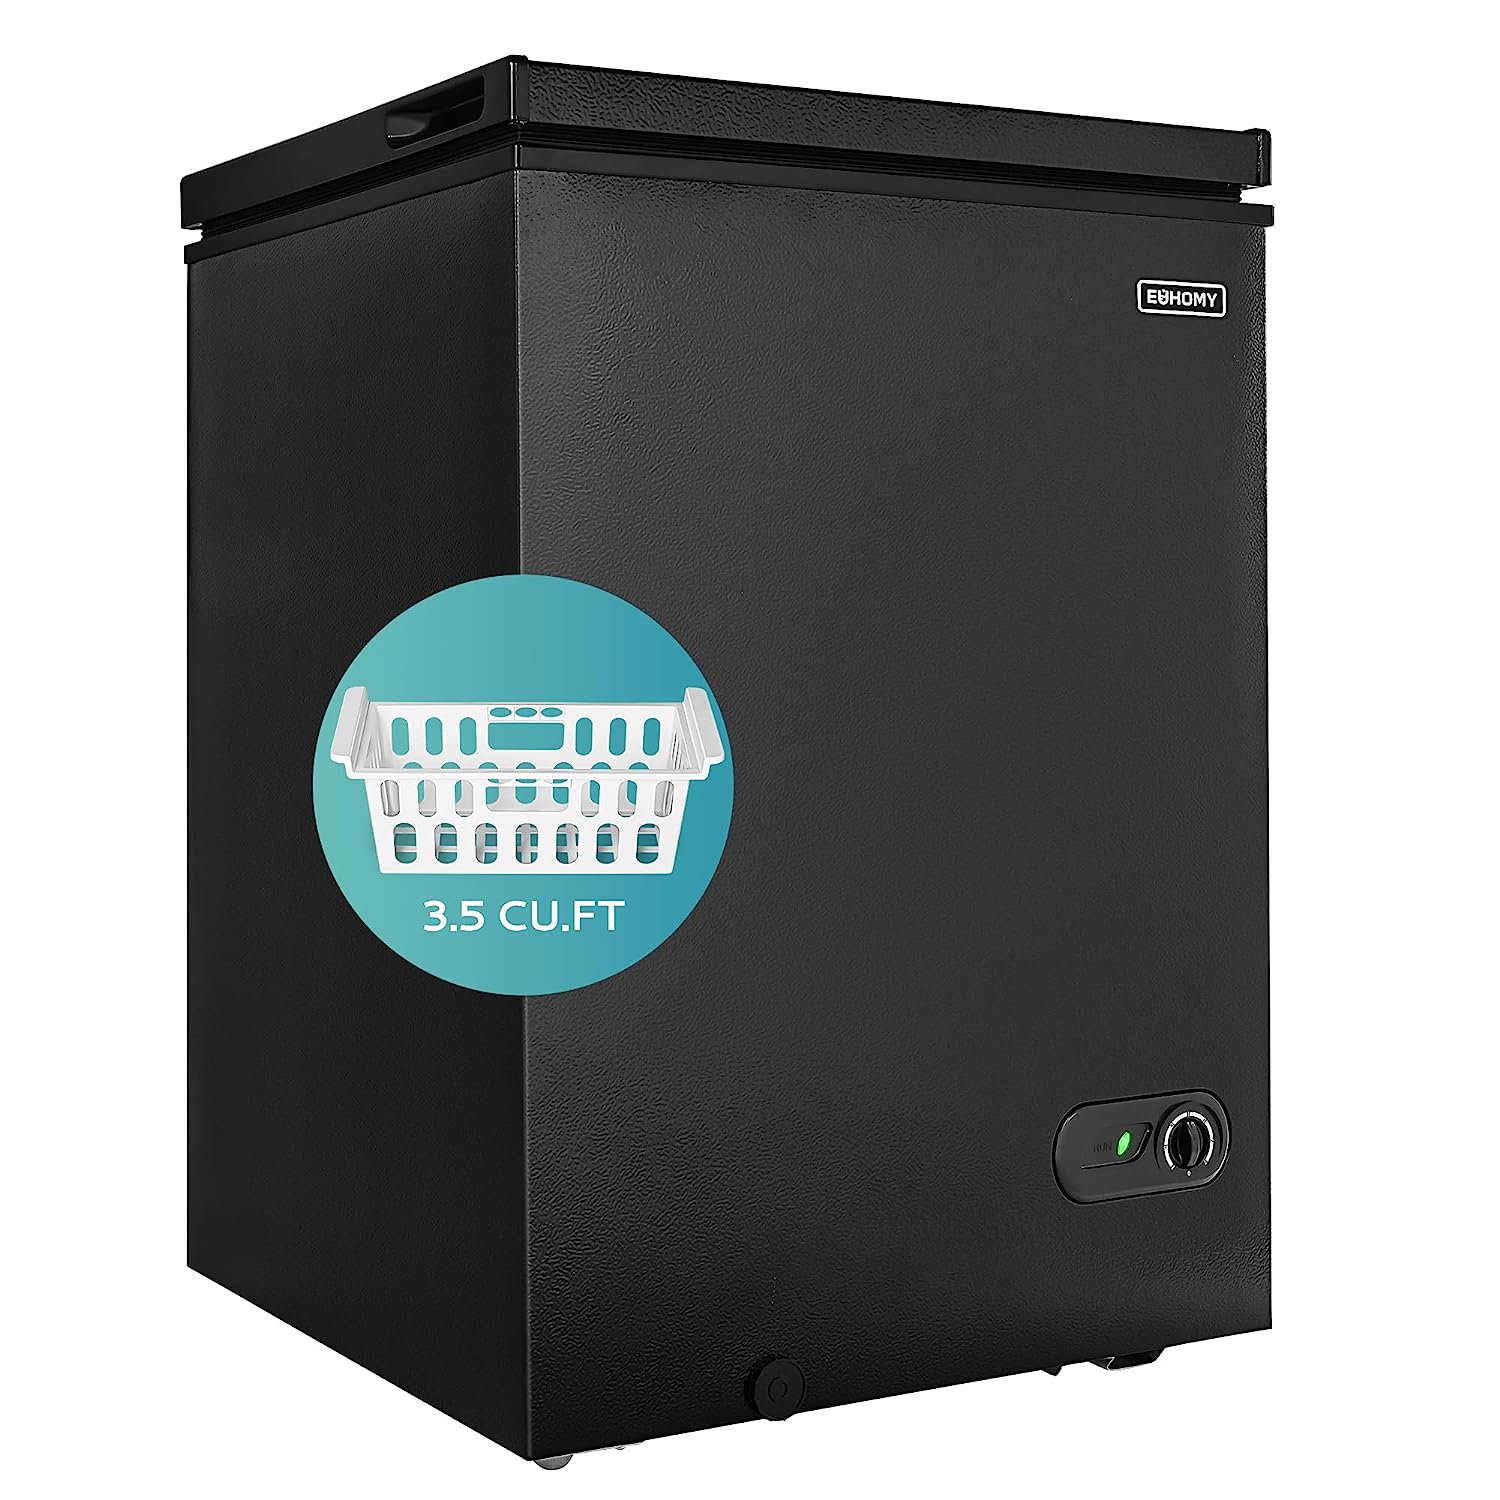 EUHOMY 3.5 Cu.Ft Chest Freezer with Removable Basket, [...]